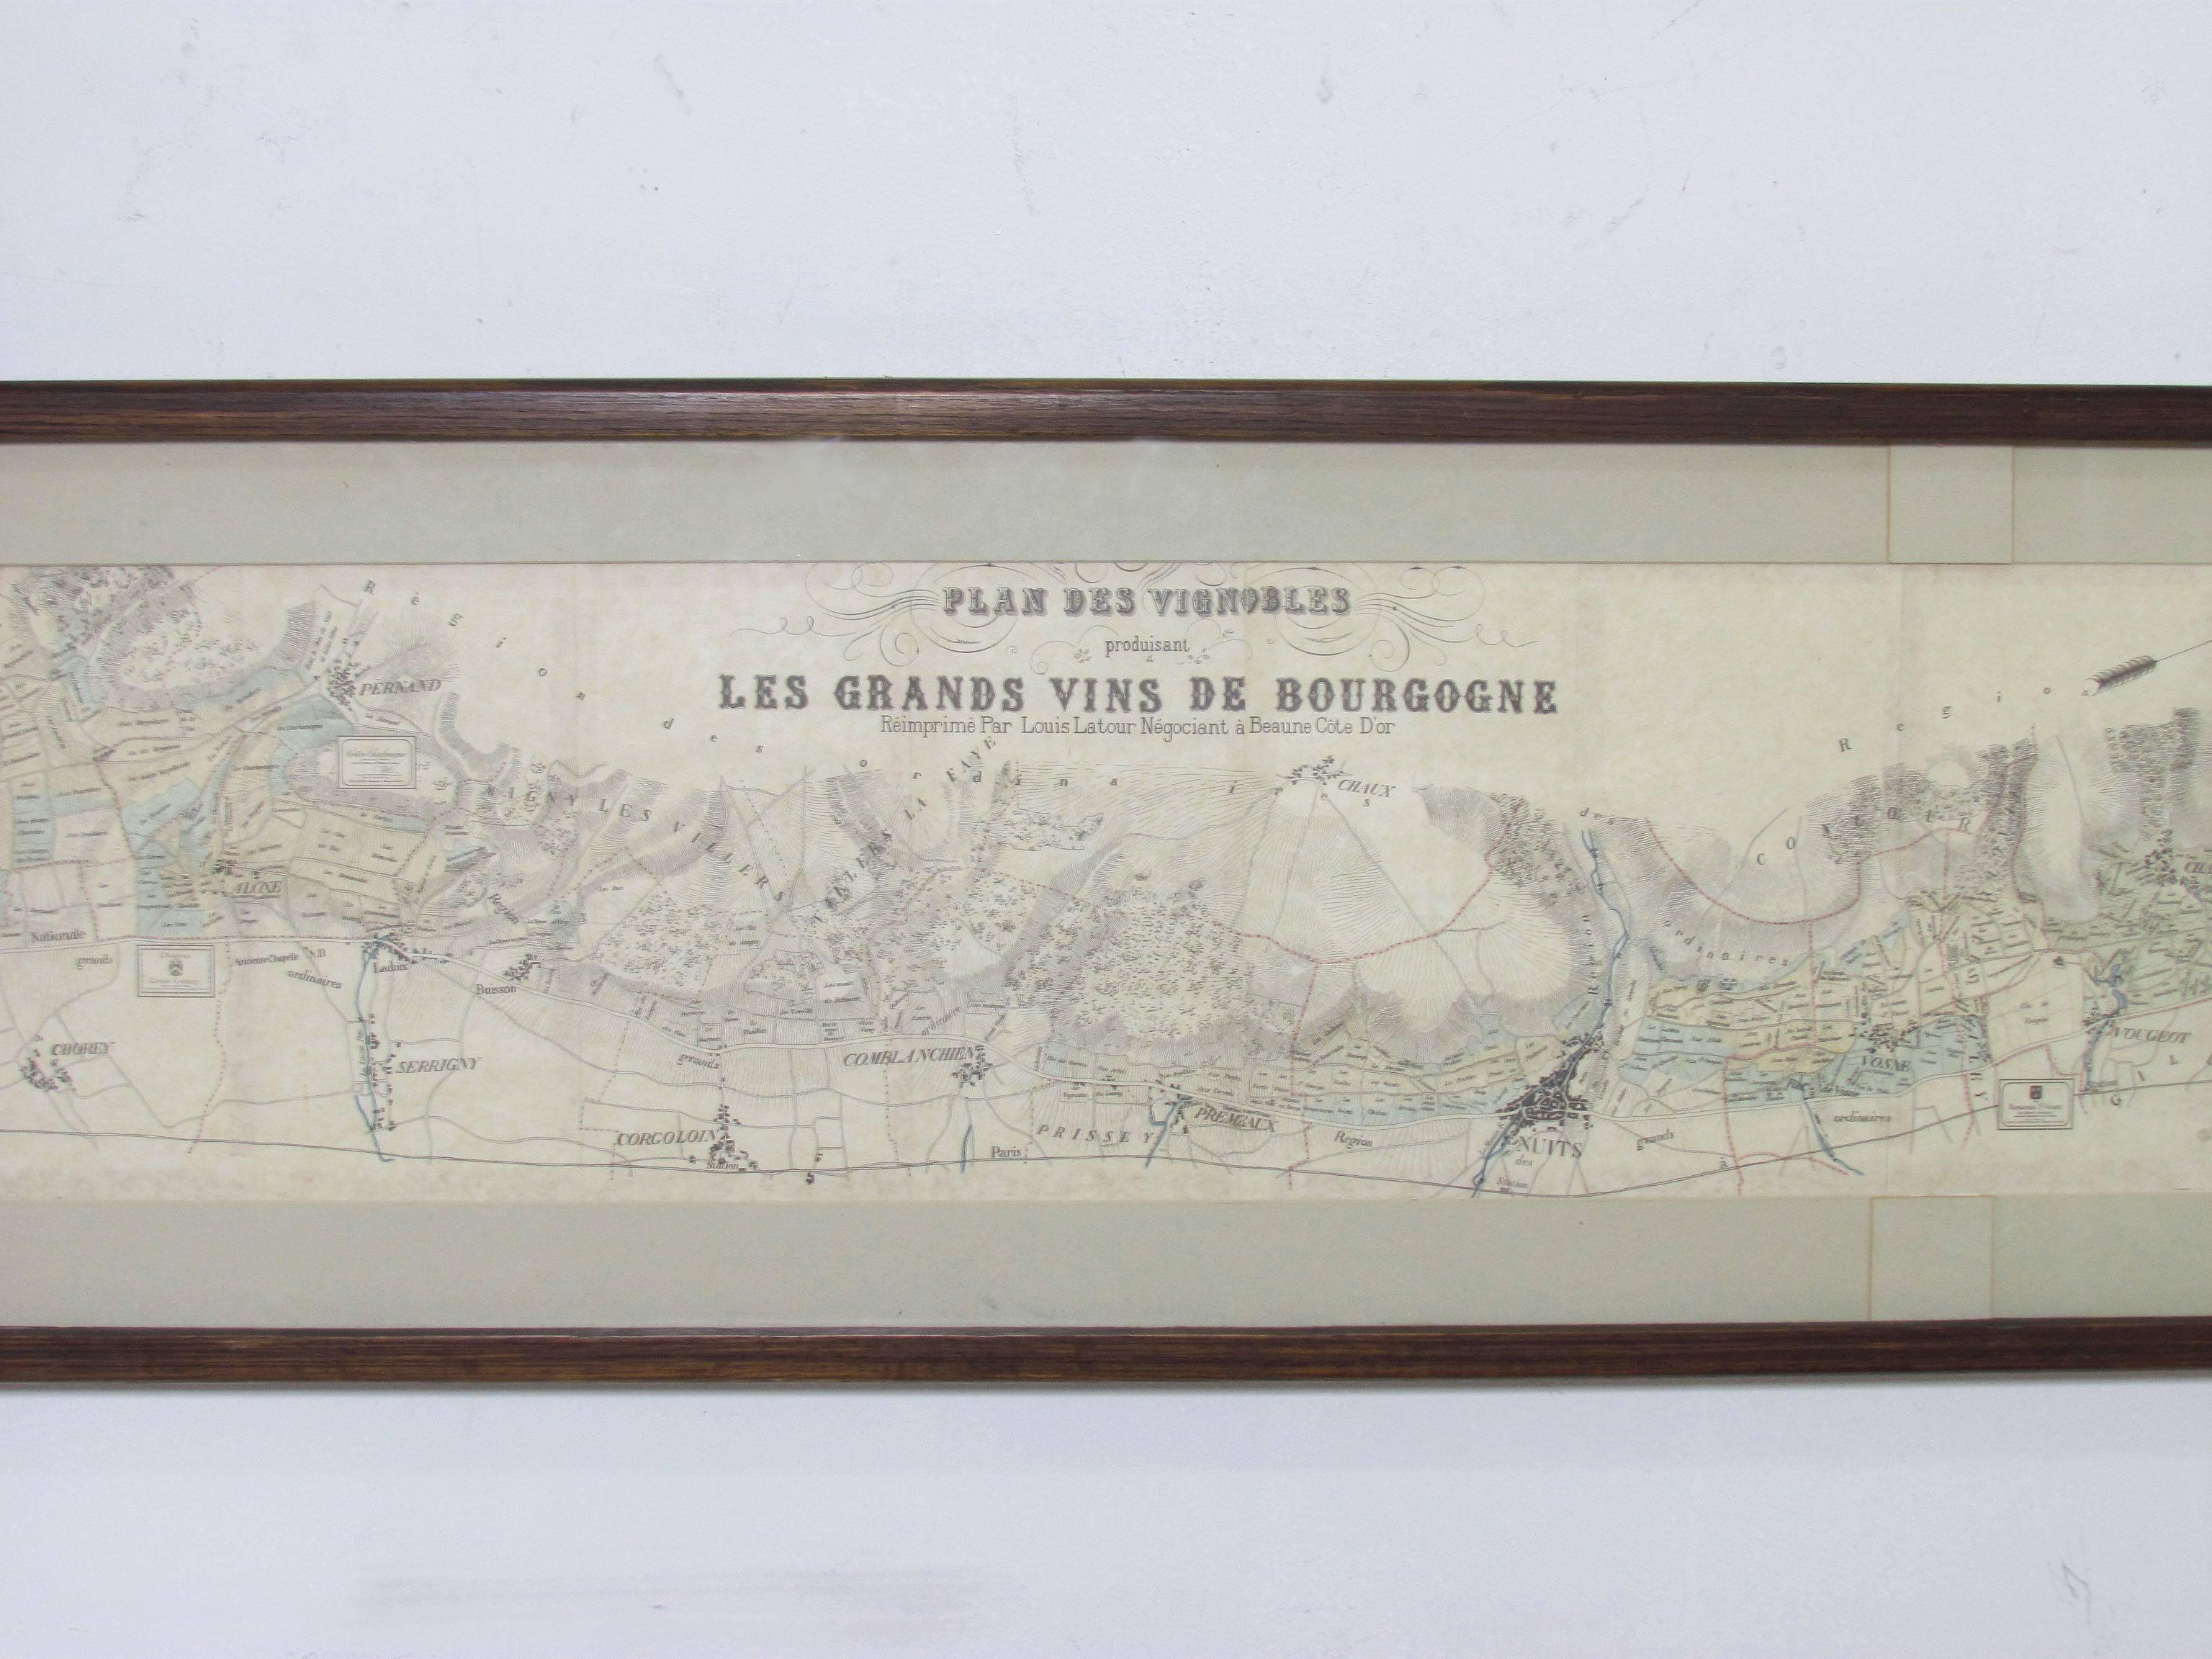 Panoramic detailed map of the vineyards of the Bourgogne (Burgundy) region of France, made for the legendary Louis Latour winemakers. This rare framed lithograph is a circa 1920s, reprint of a 19th century map designating the location and terroir of